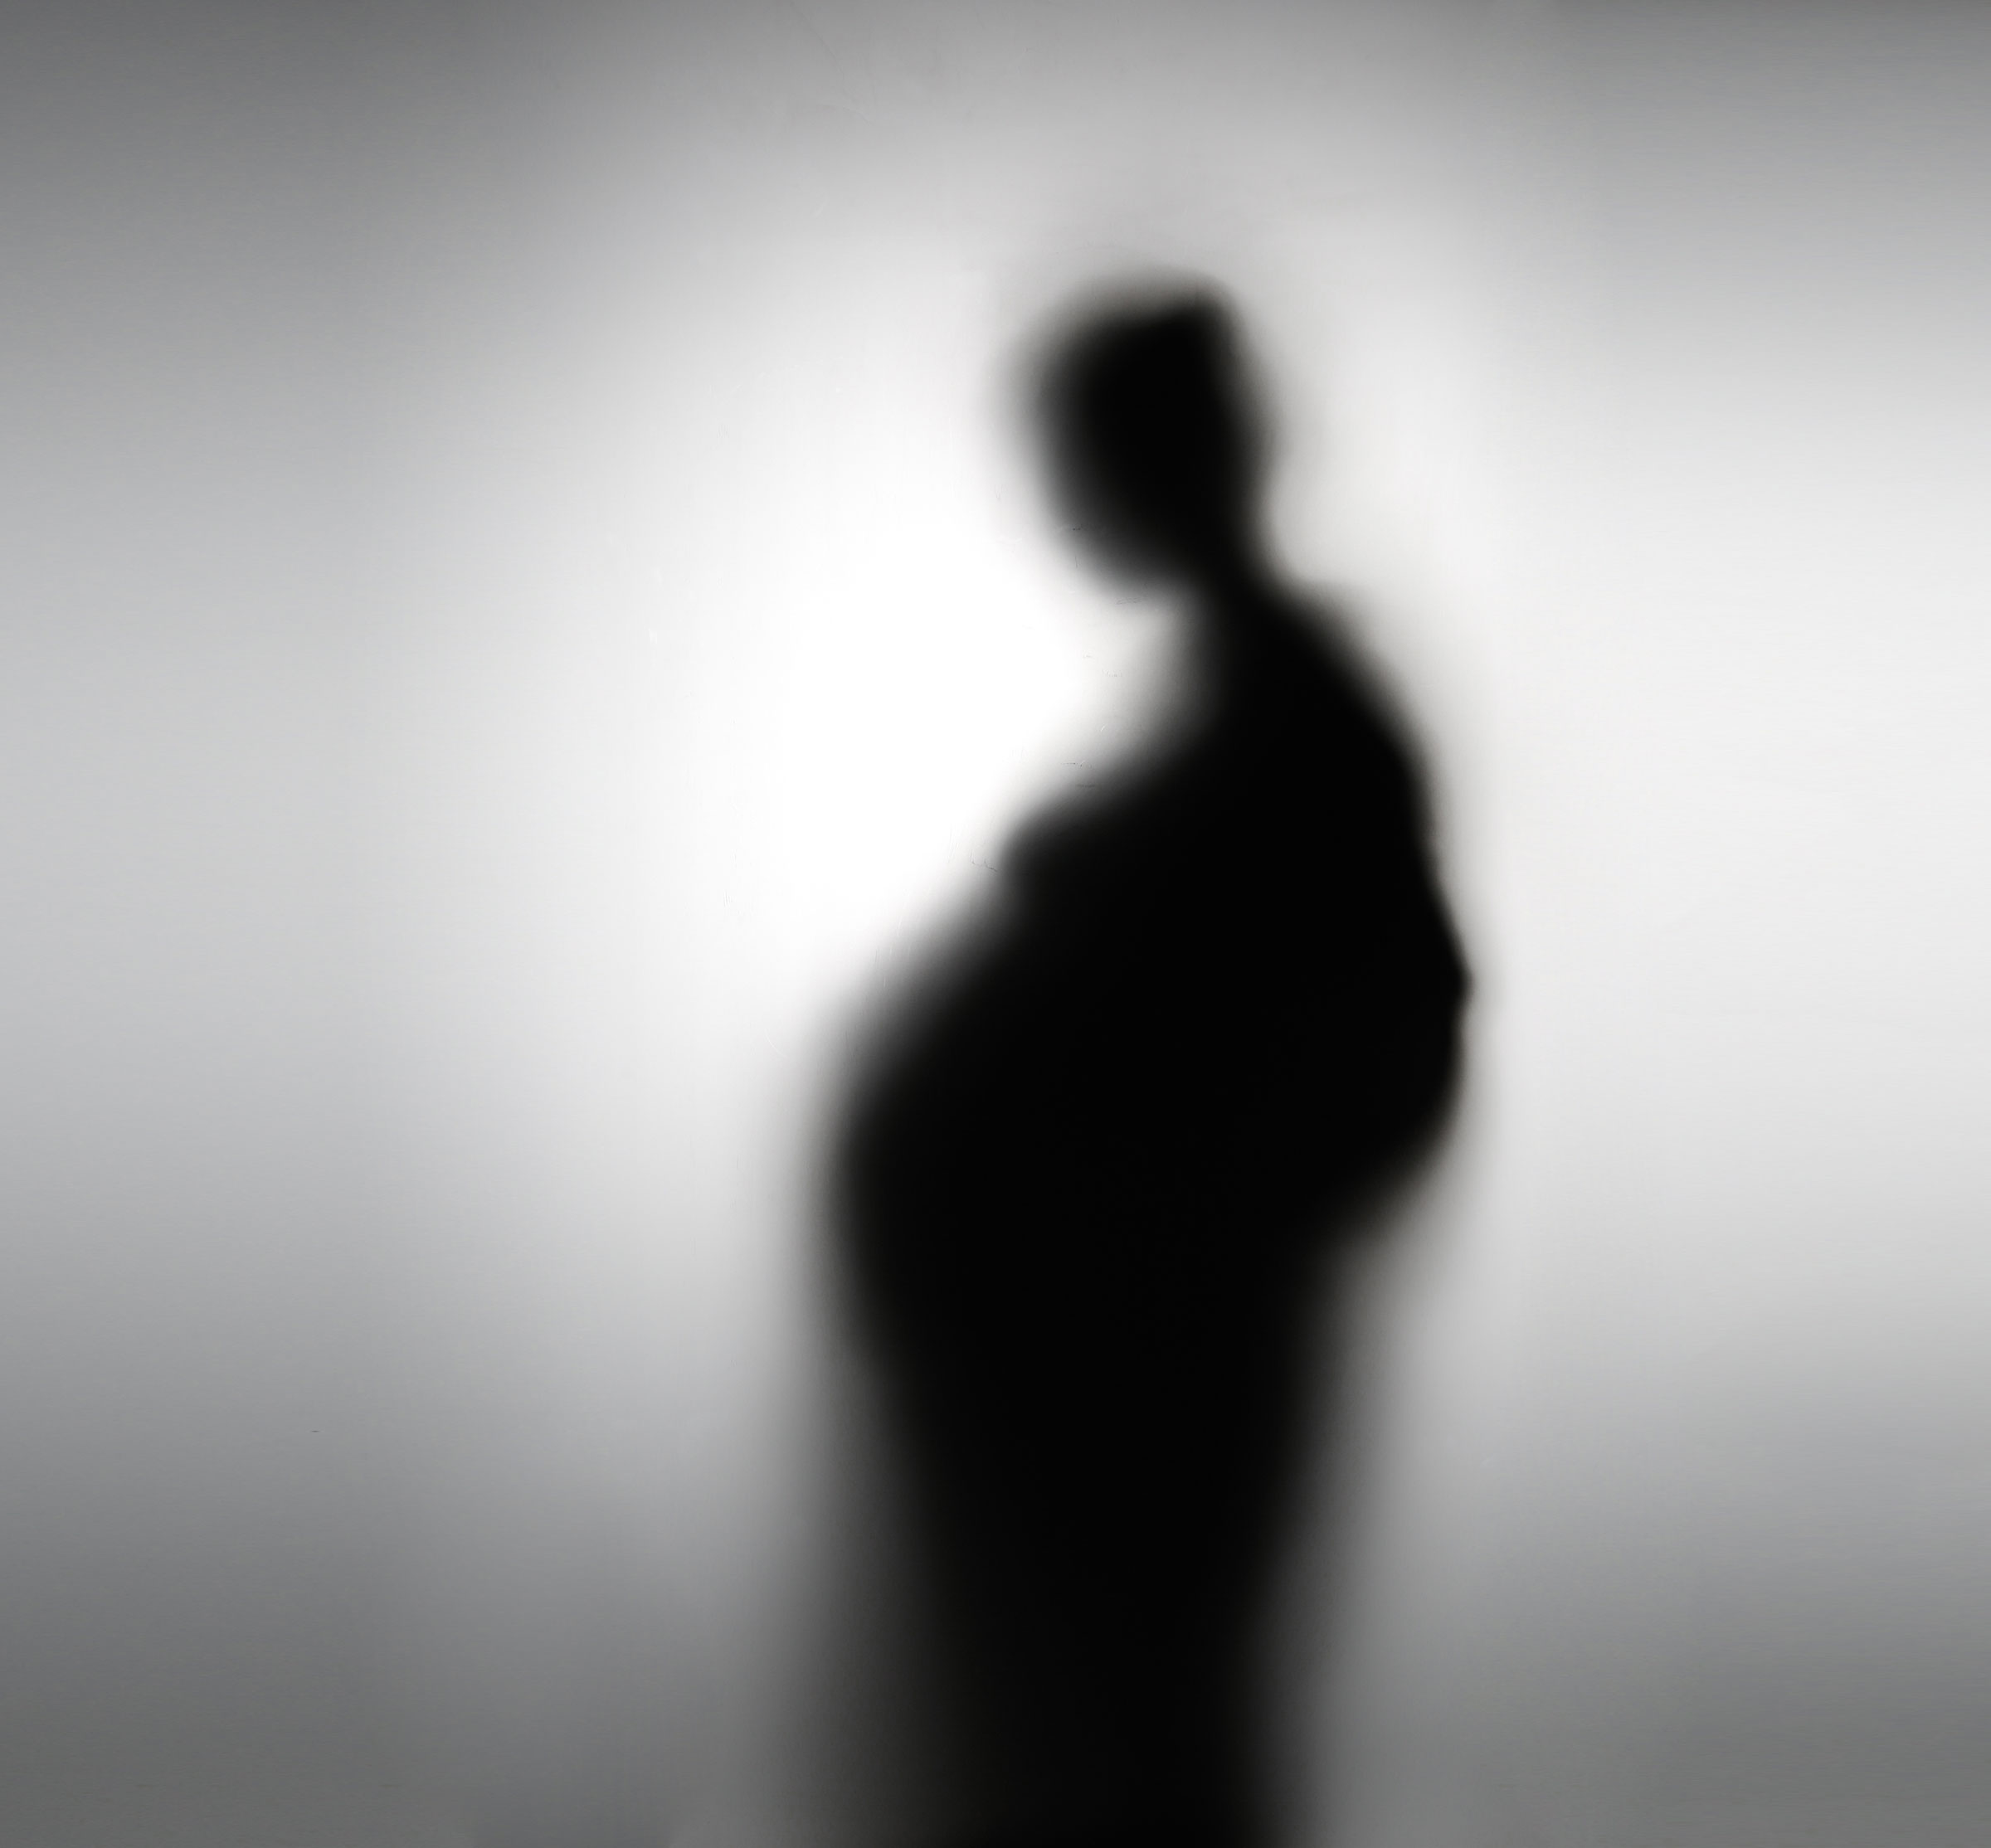 The Criminalization of Pregnancy Must End